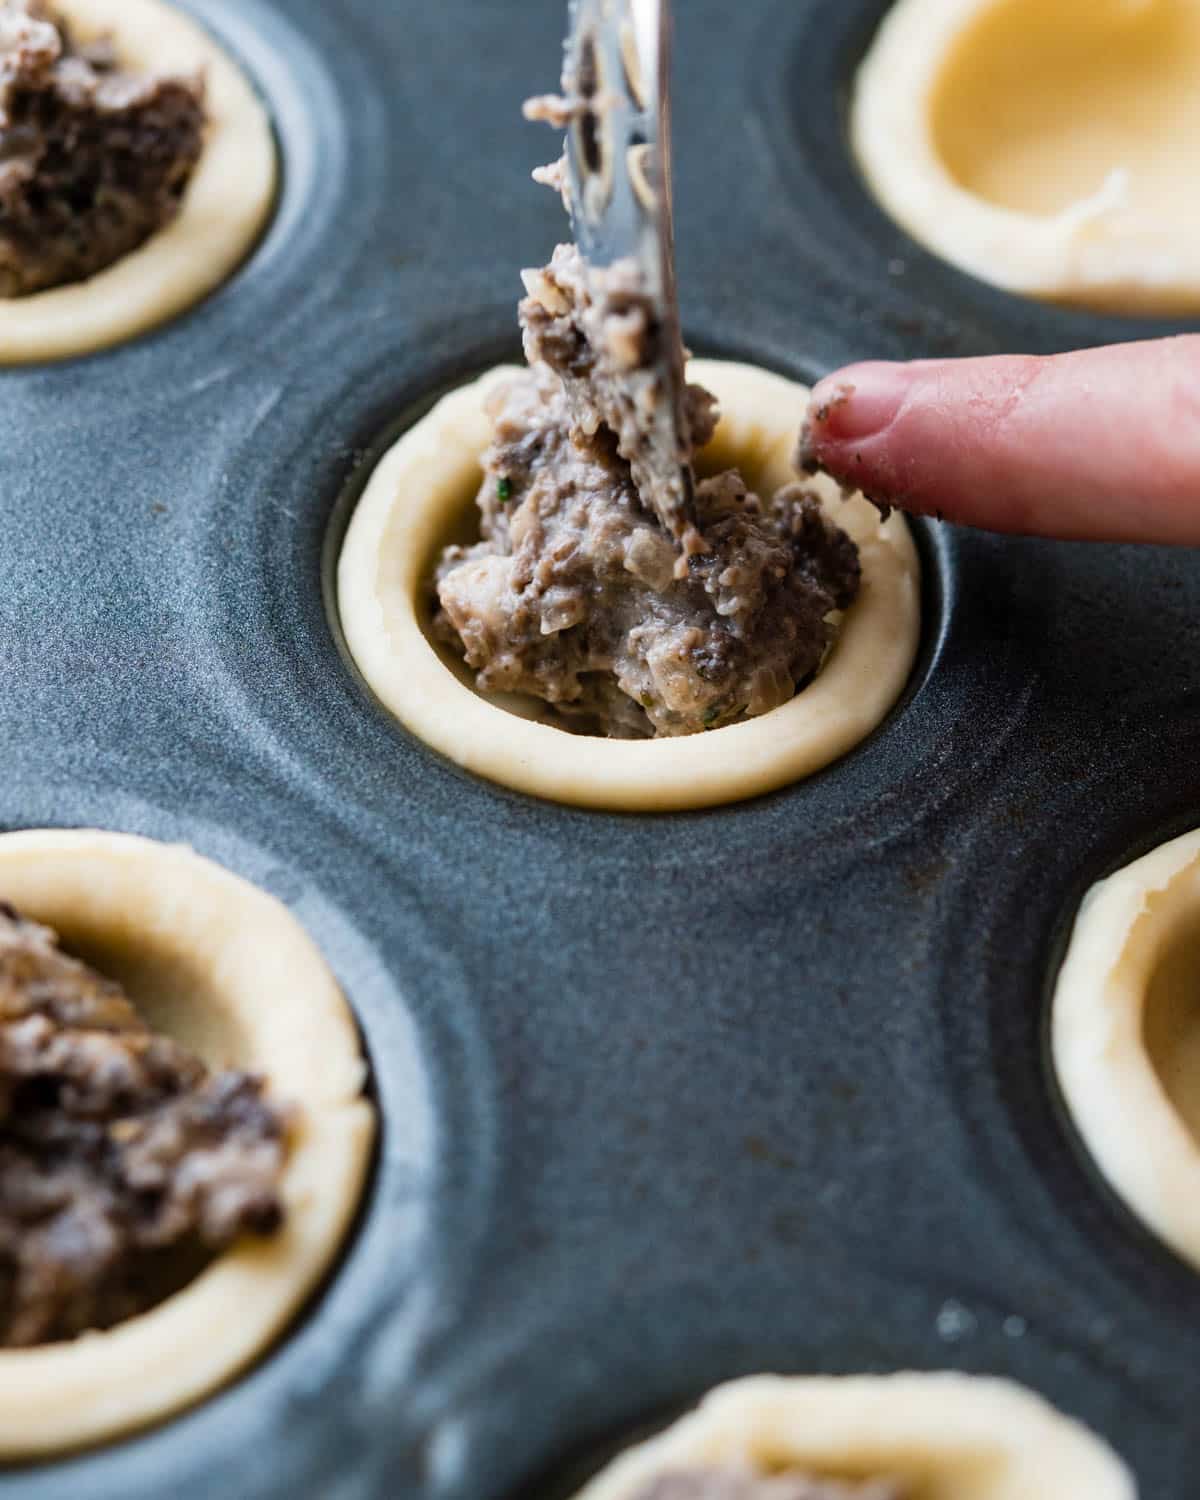 I am adding the mushroom filling to the hors d'oeuvres pastry.